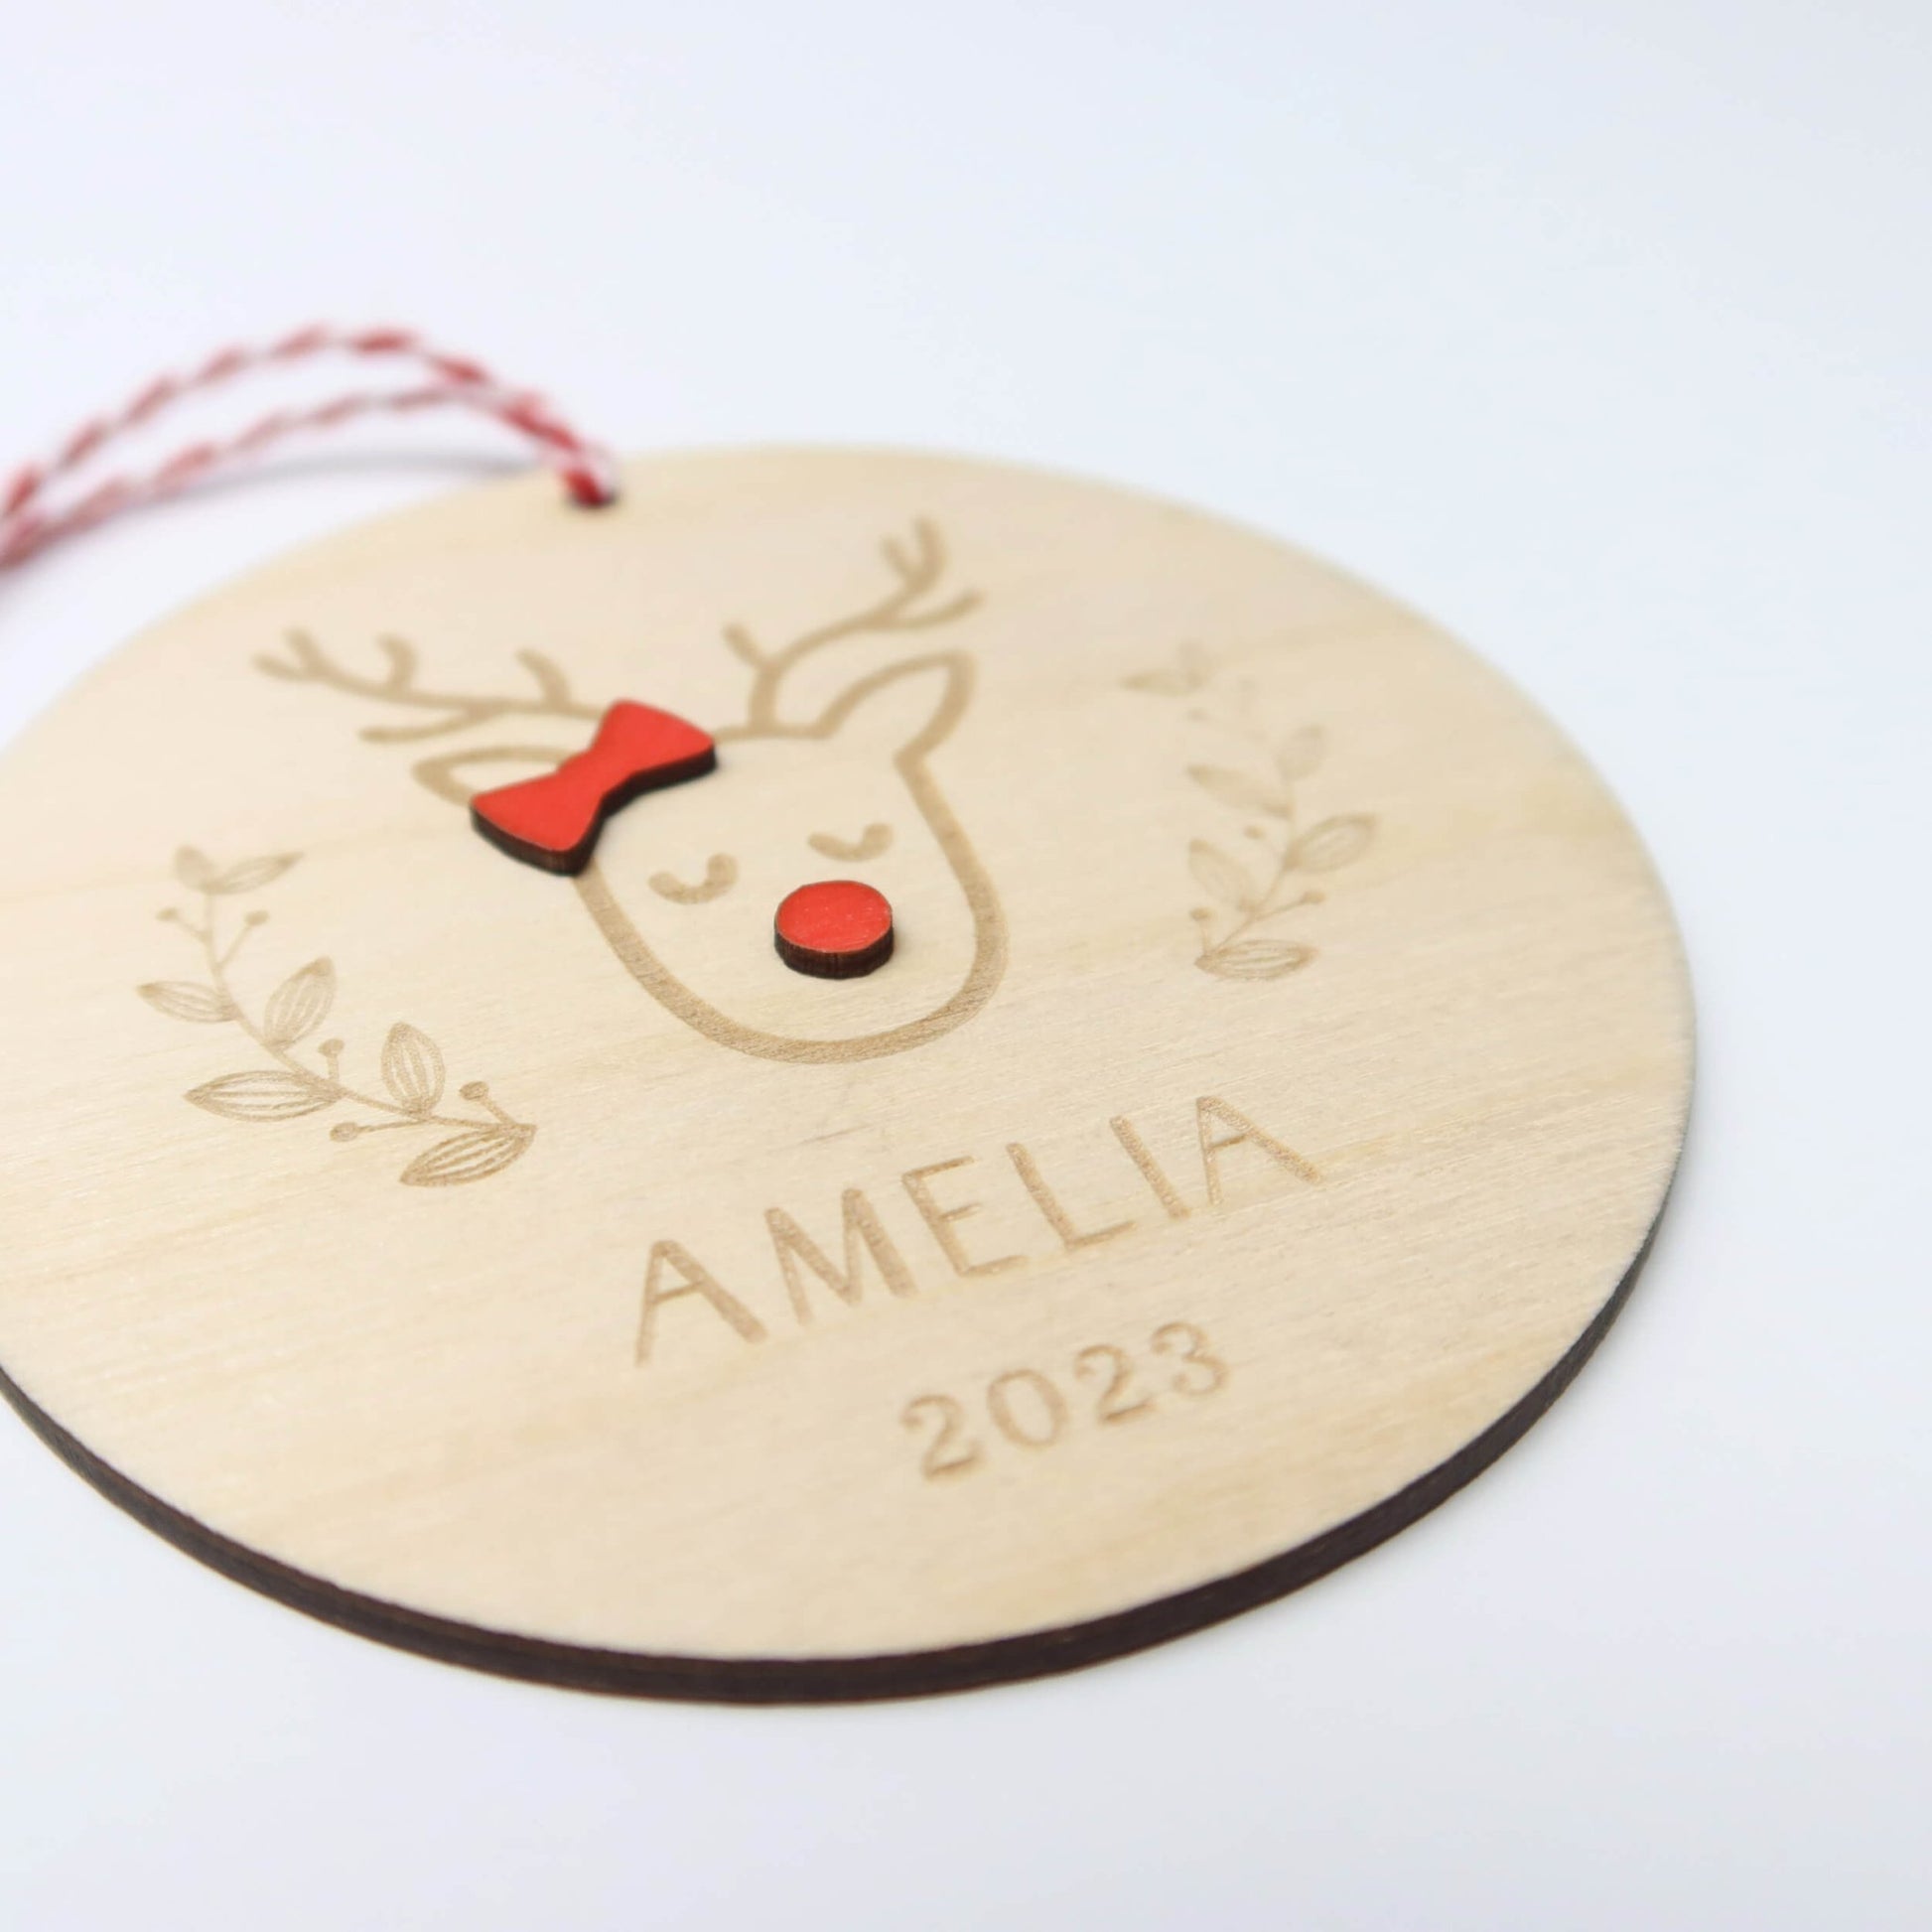 Reindeer Personalized Kid's Name Ornament - Holiday Ornaments - Moon Rock Prints